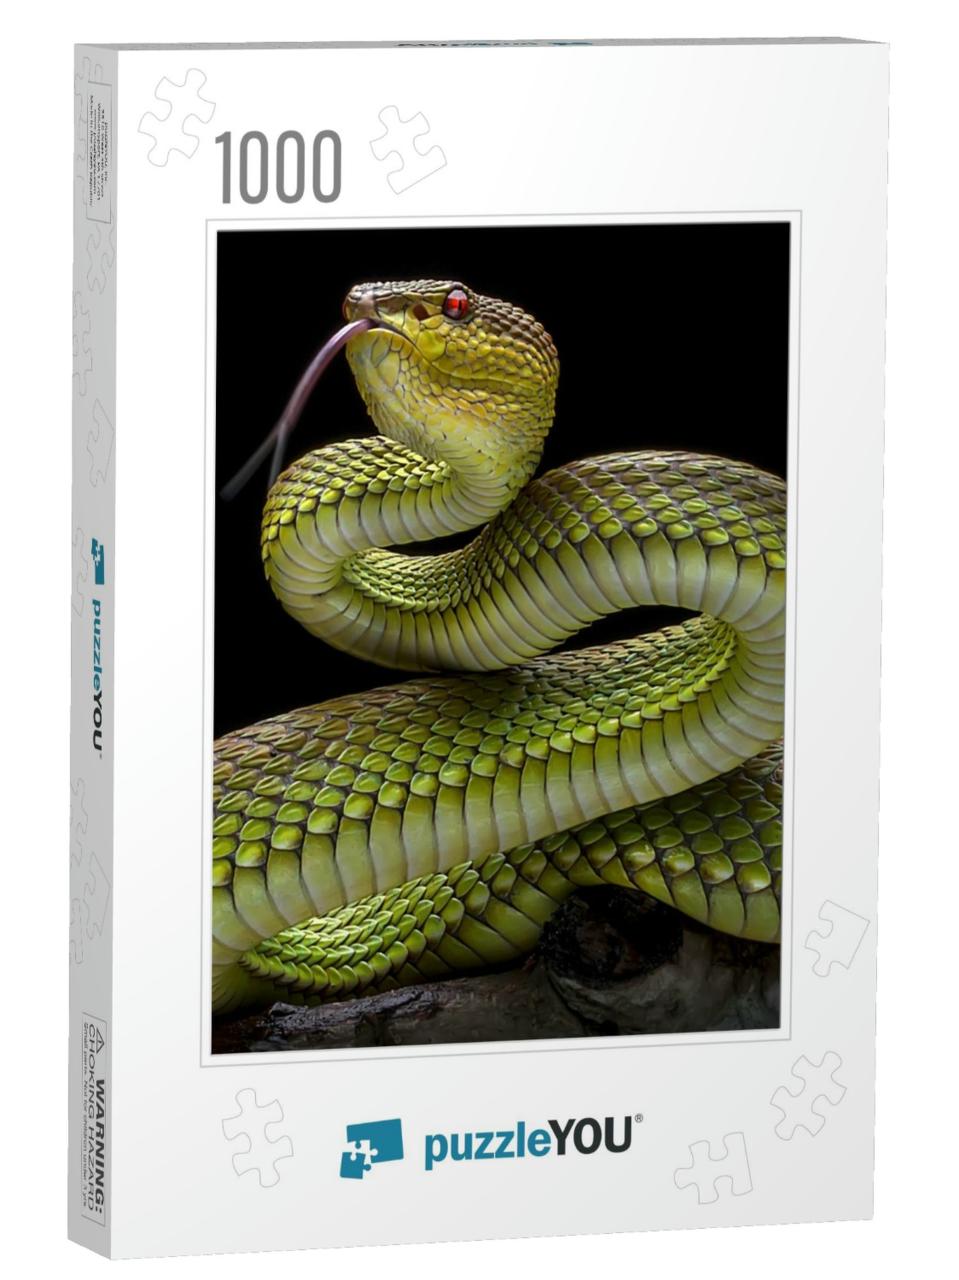 Green Goldy Skin Viper Snake 2001026 - Exotic Reptile Ani... Jigsaw Puzzle with 1000 pieces